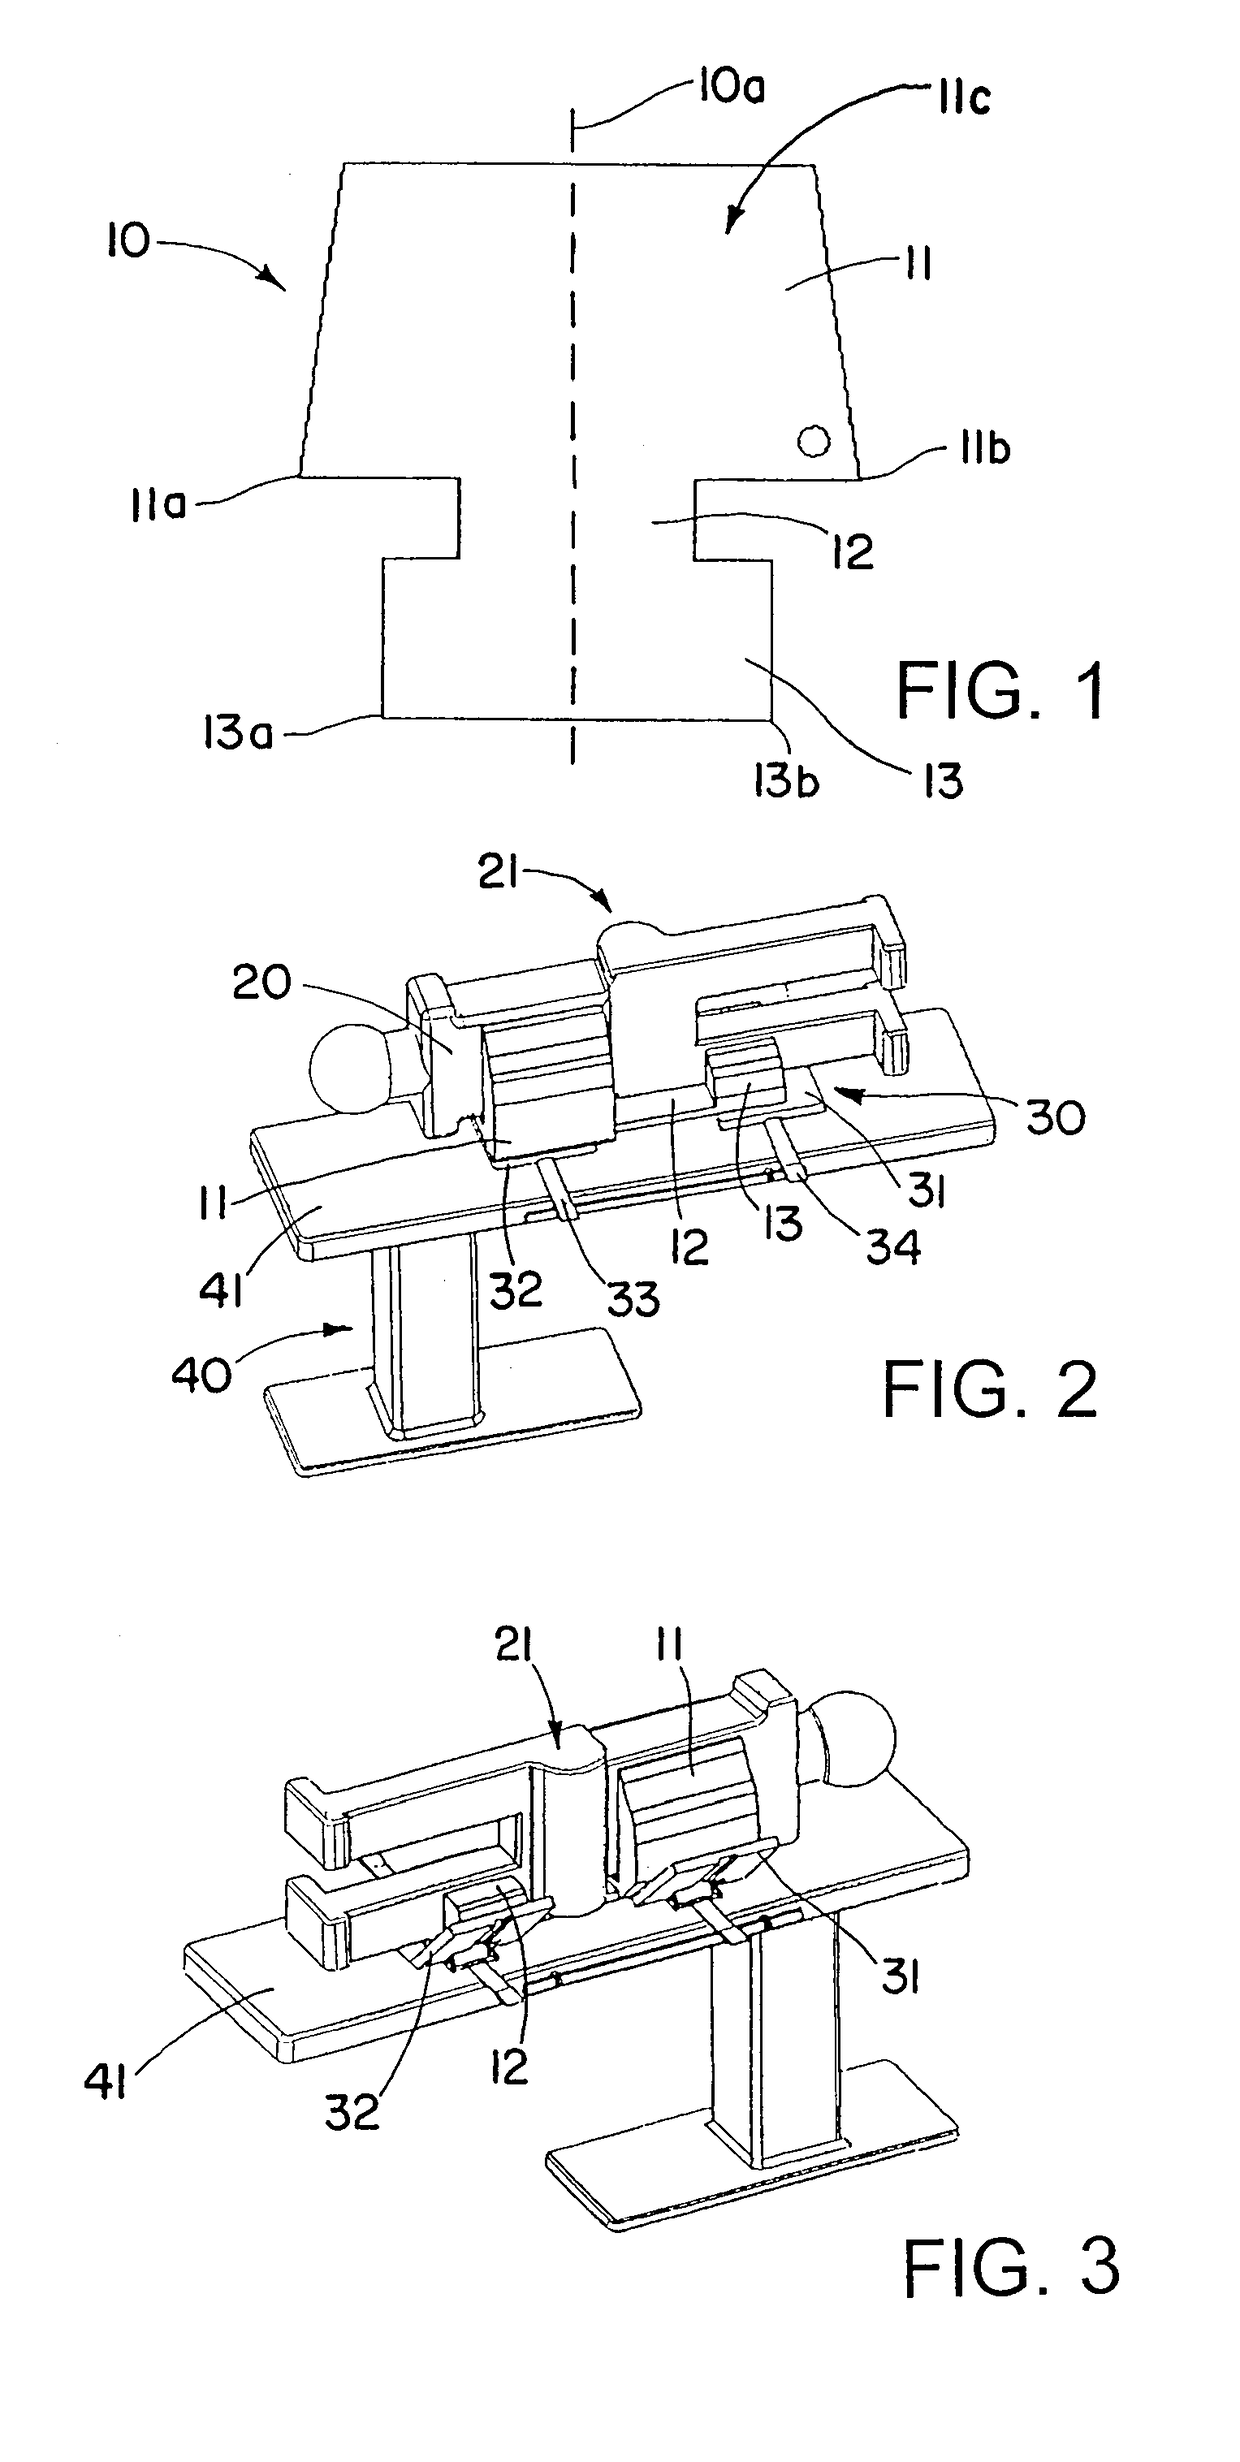 Patient lateral positioning device for pelvic treatments comprising a vacuum mattress